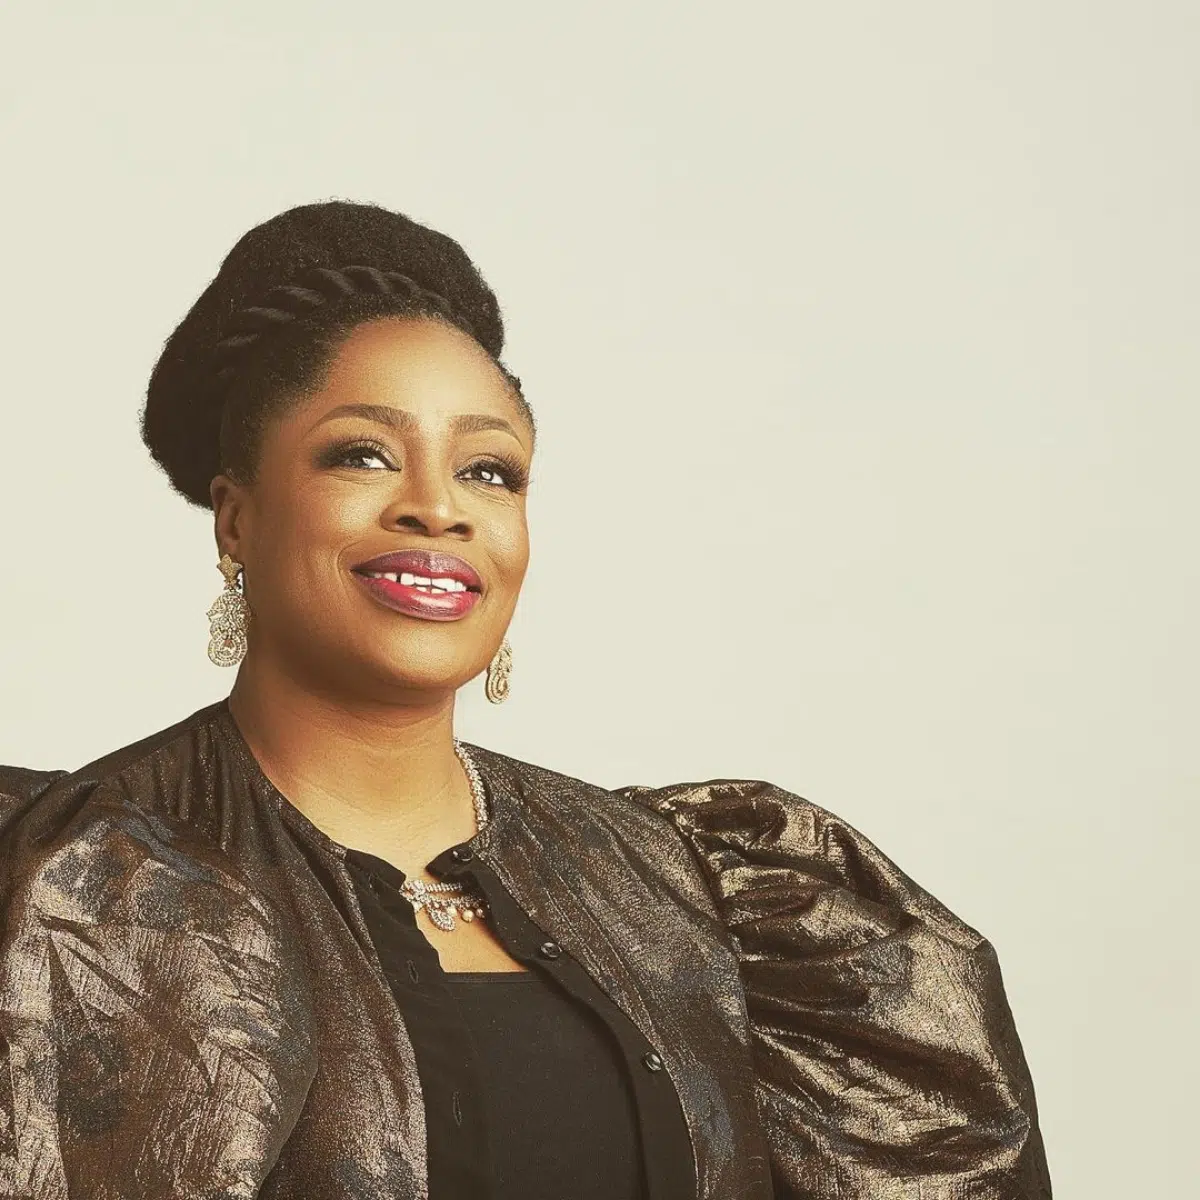 Ada Ehi Joins Sinach As The Only Nigerian Gospel Artists To Achieve 100 Million Views on Youtube | Read More…